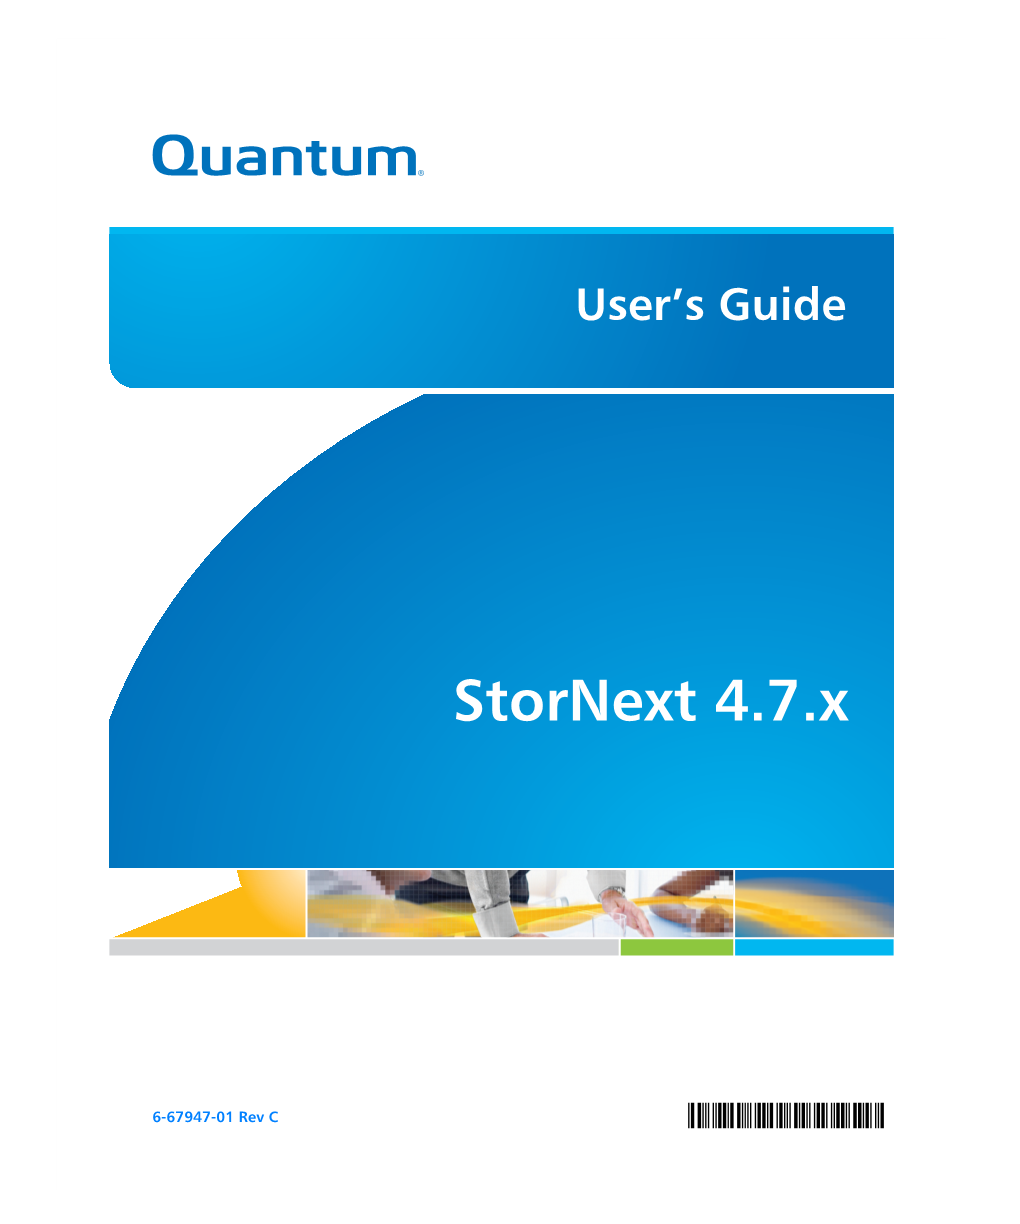 Stornext File System